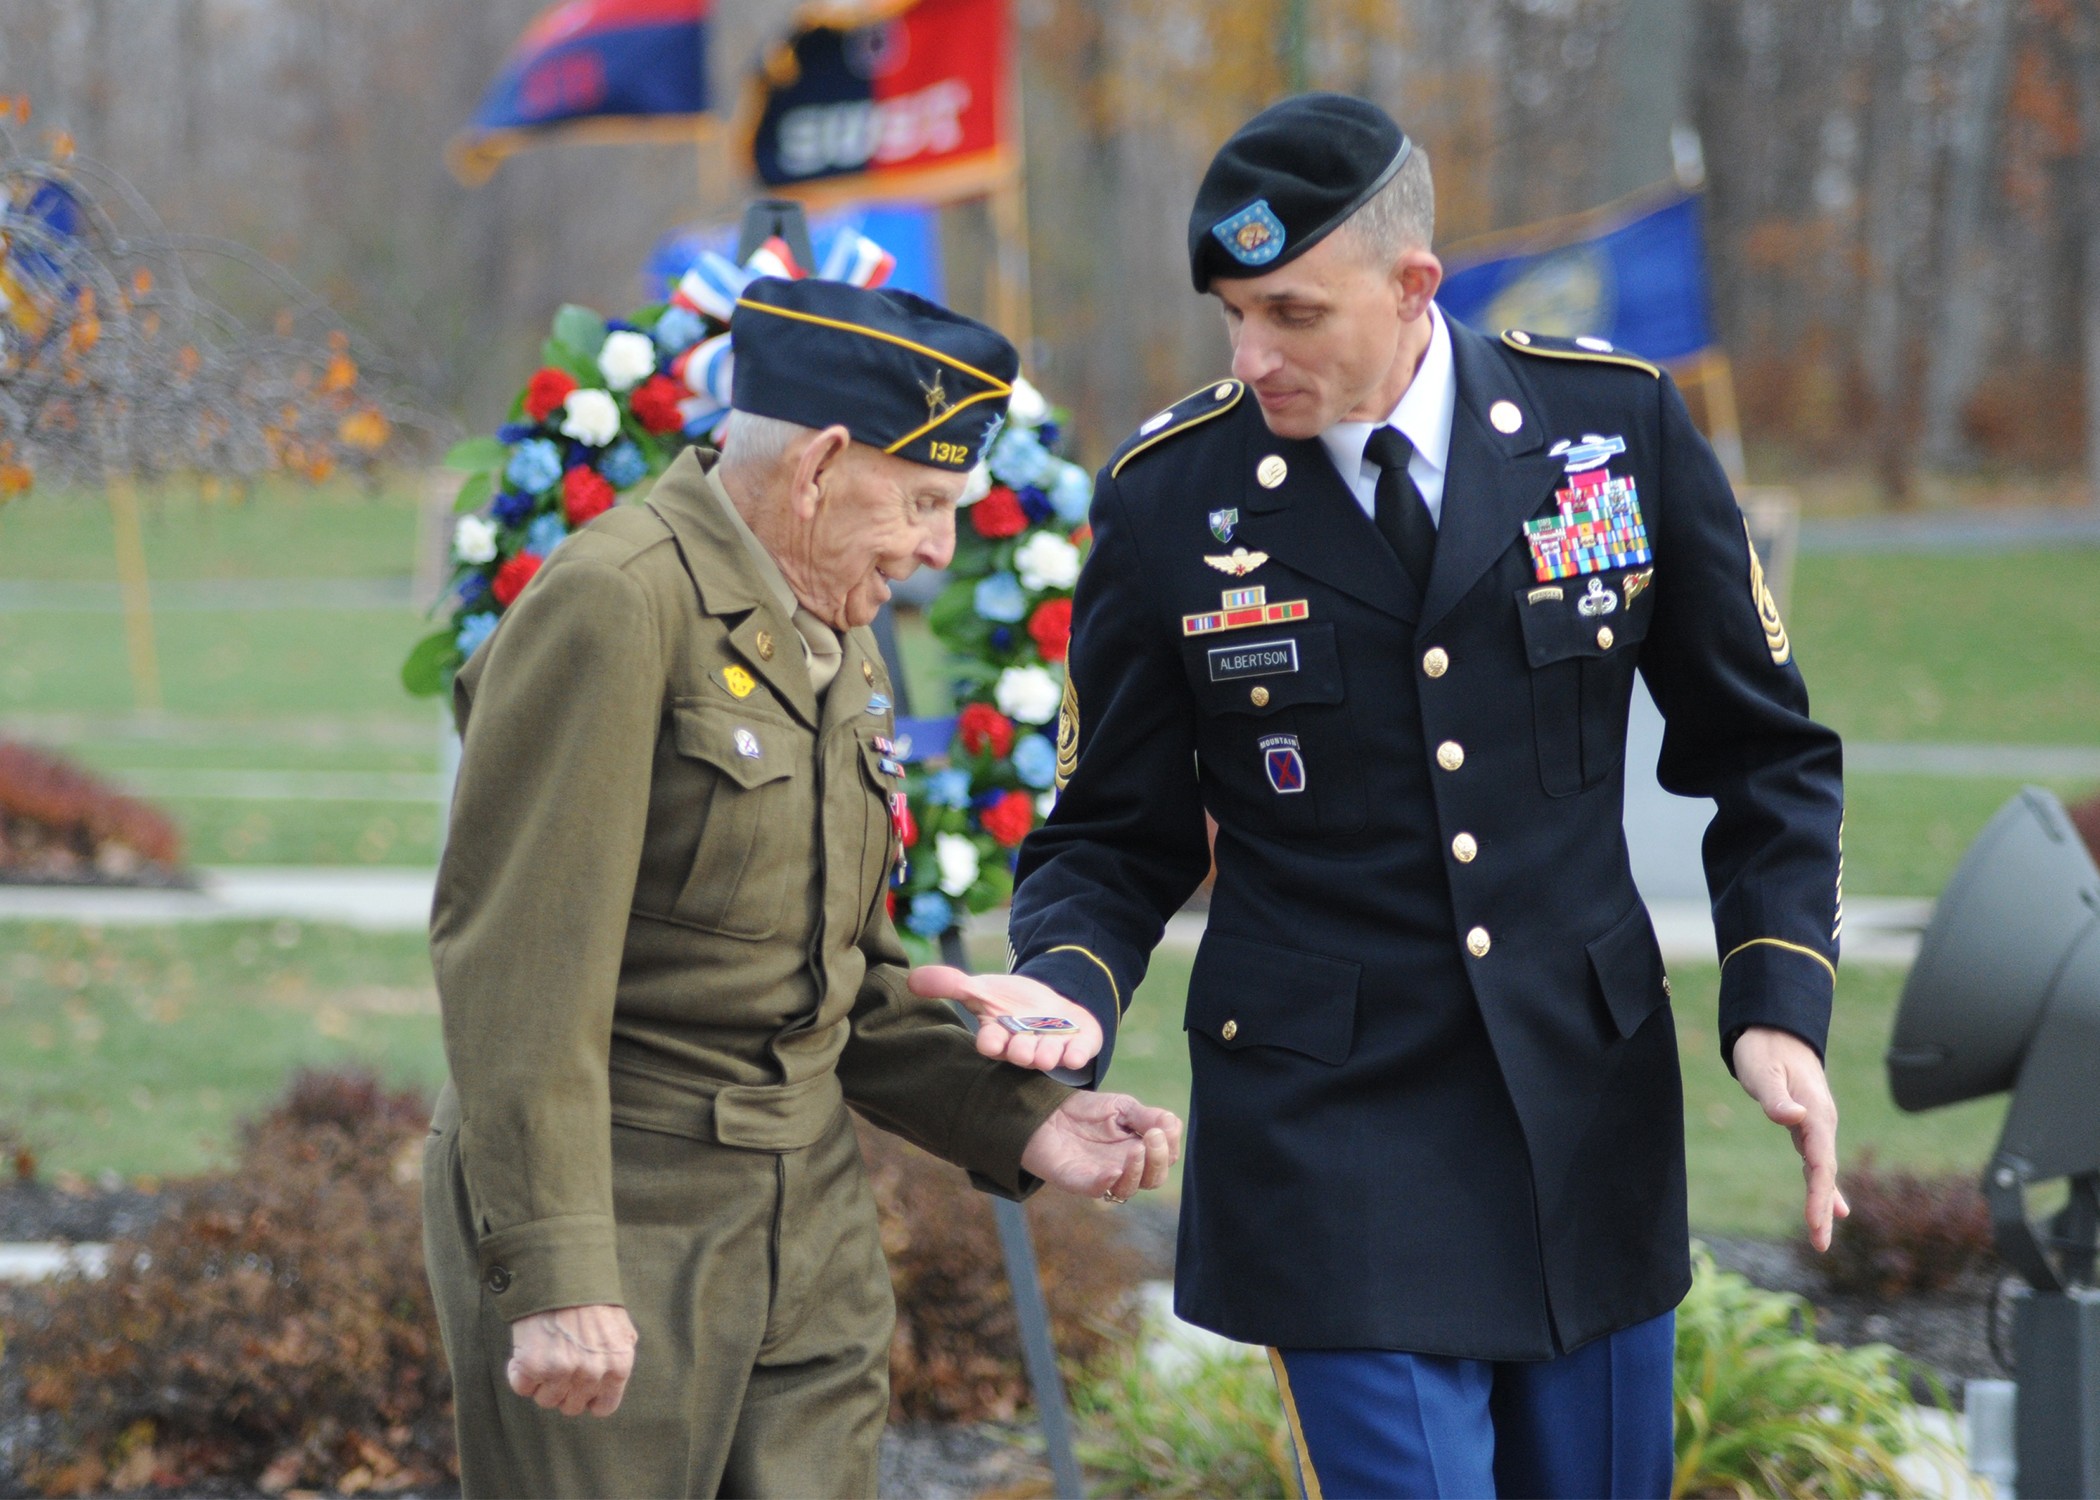 Veterans Day ceremony honors sacrifices, valor of service members